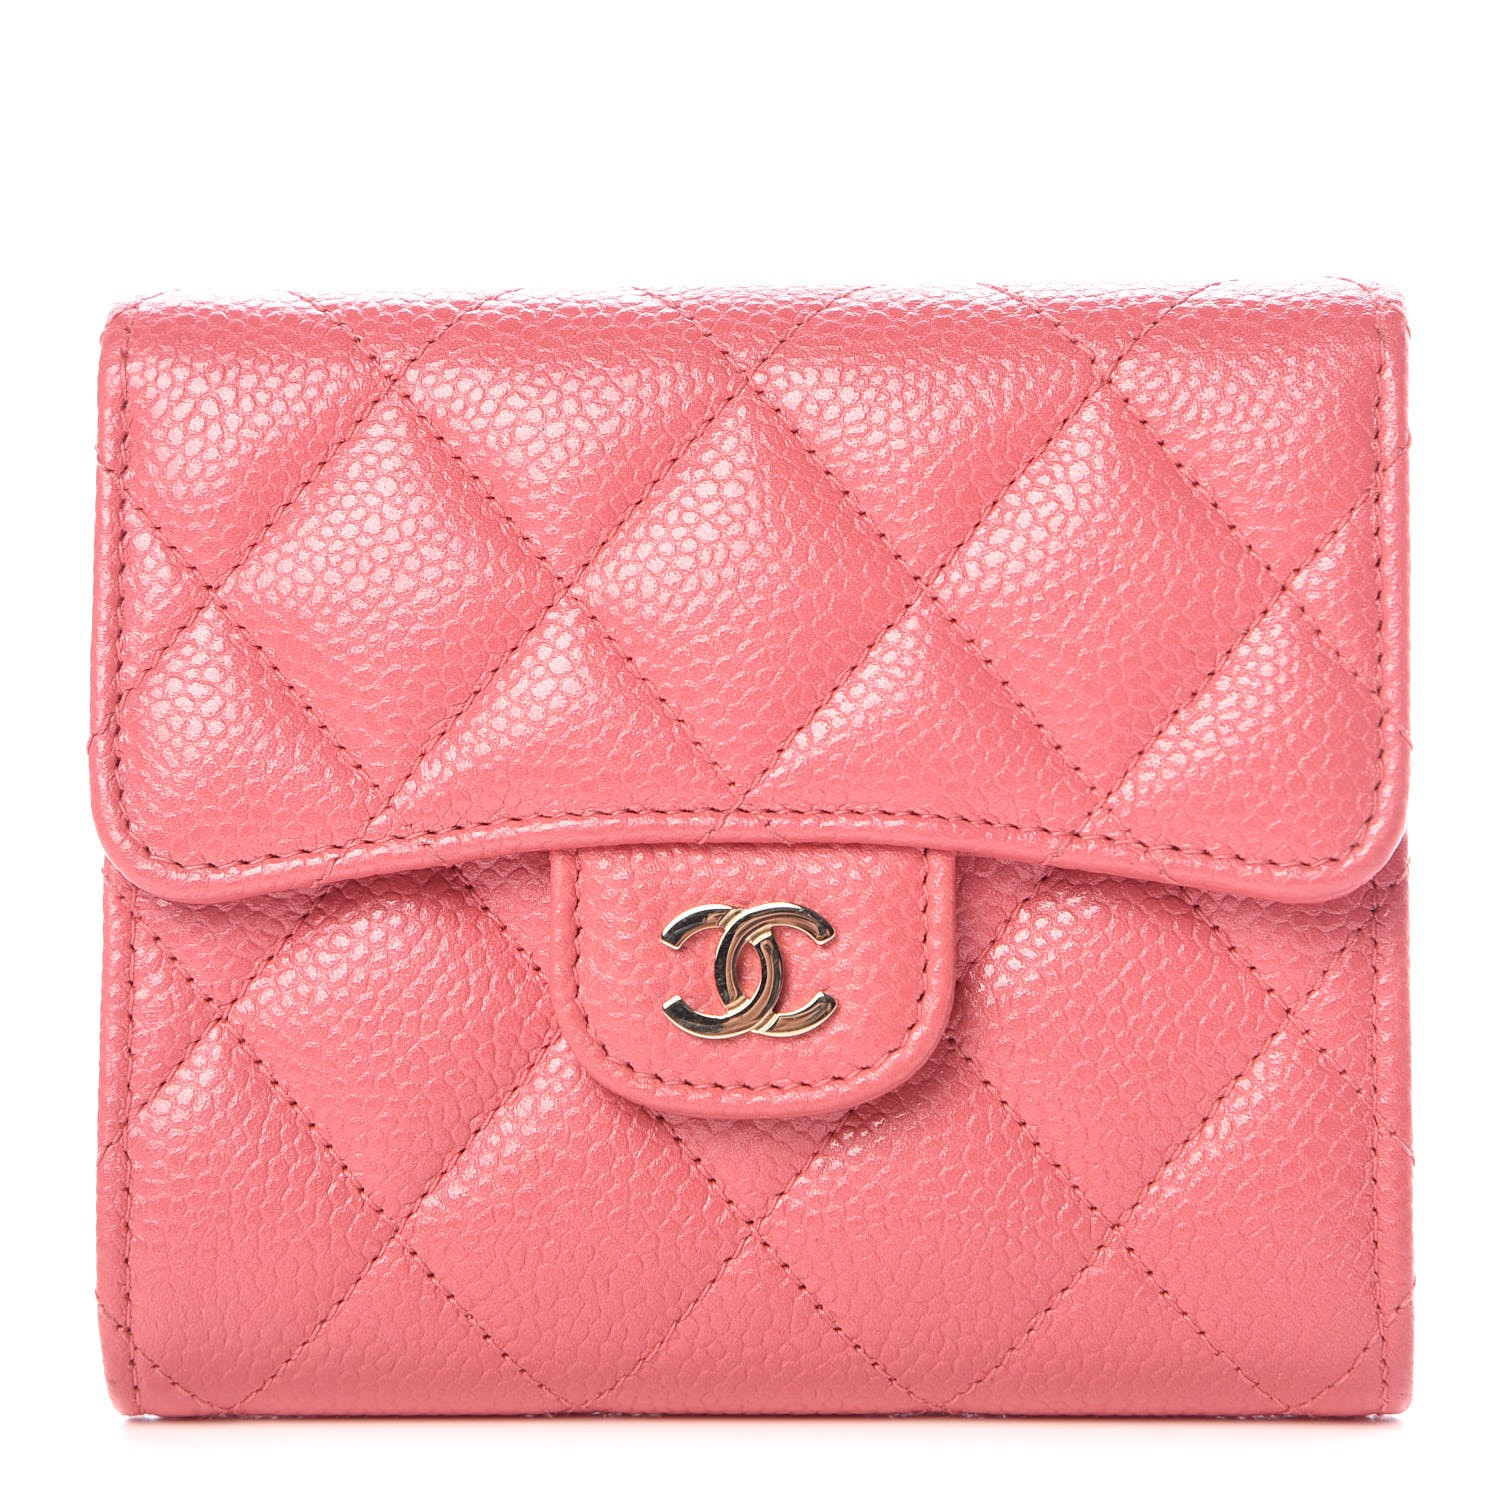 CHANEL Caviar Quilted Compact Flap Wallet Pink 348144